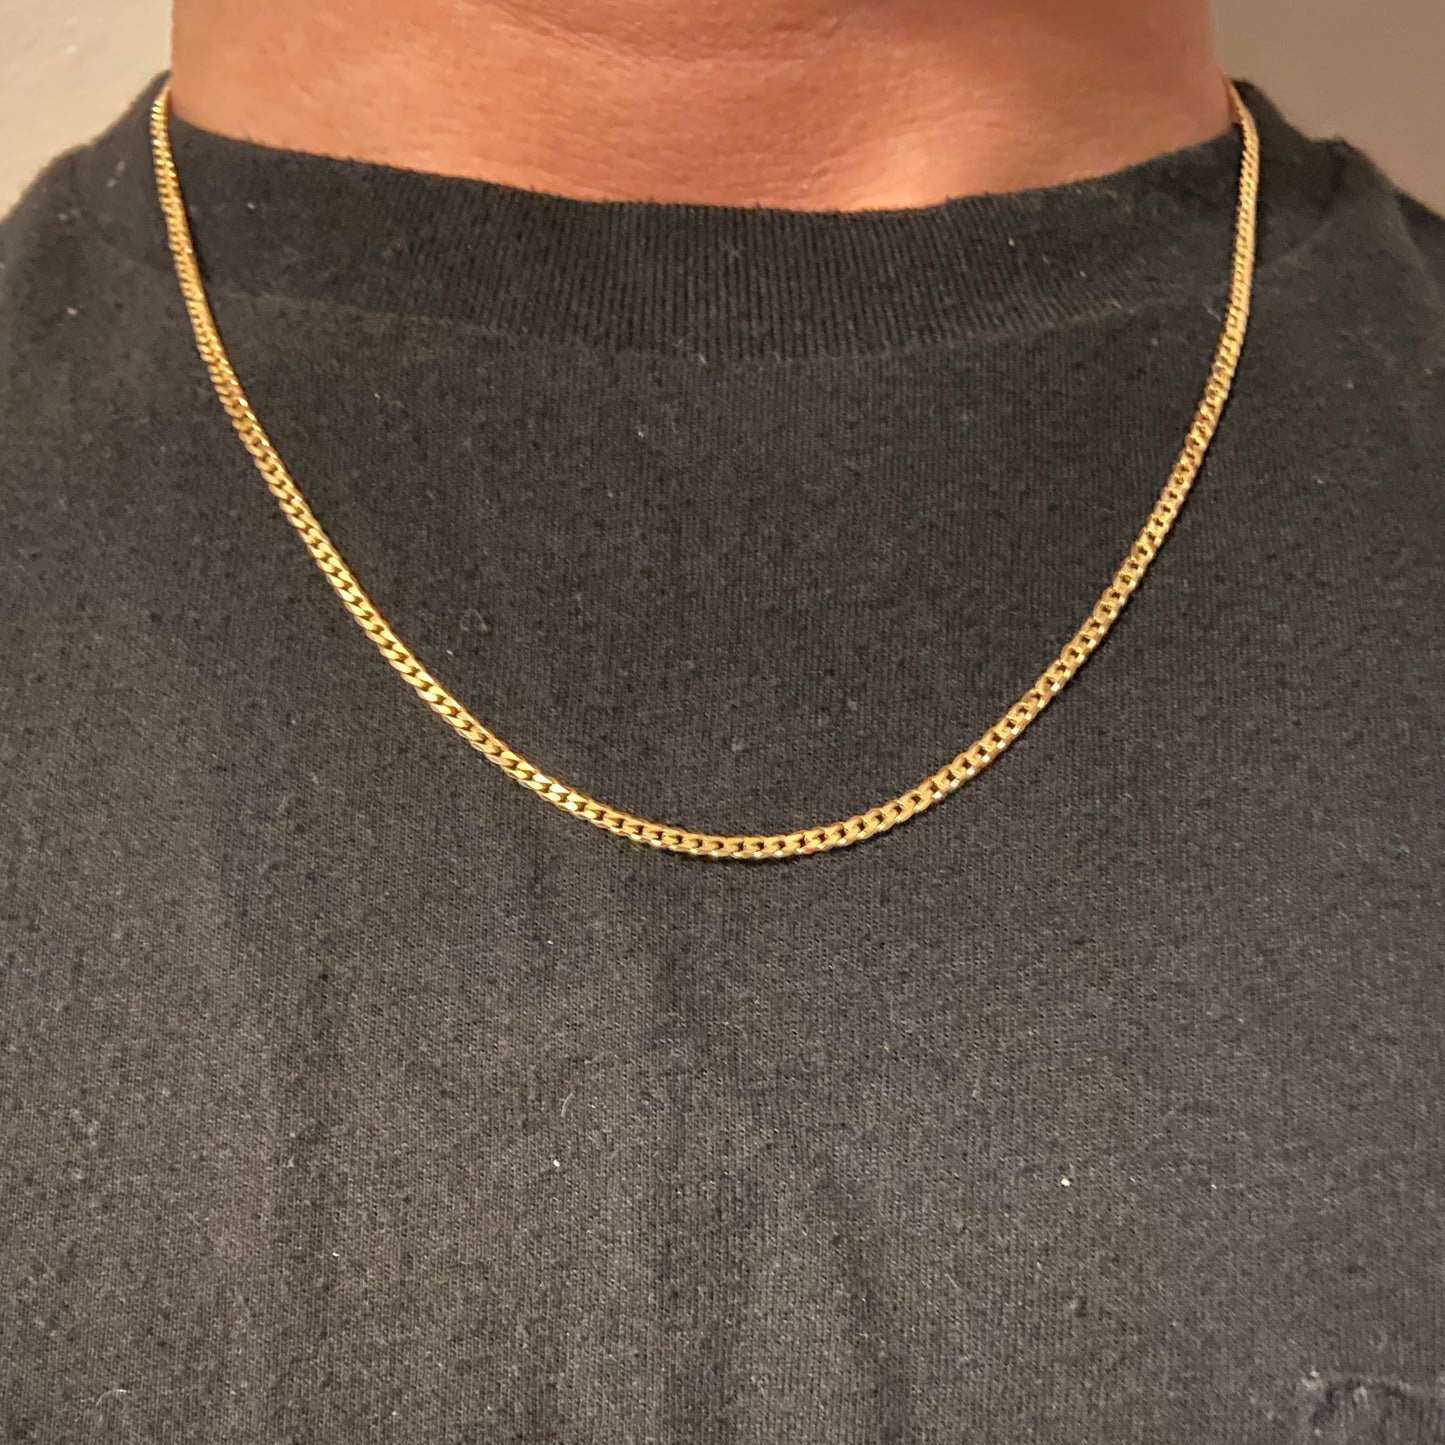 Solid Real 14k Gold Cuban Link Chain 20in 3mm